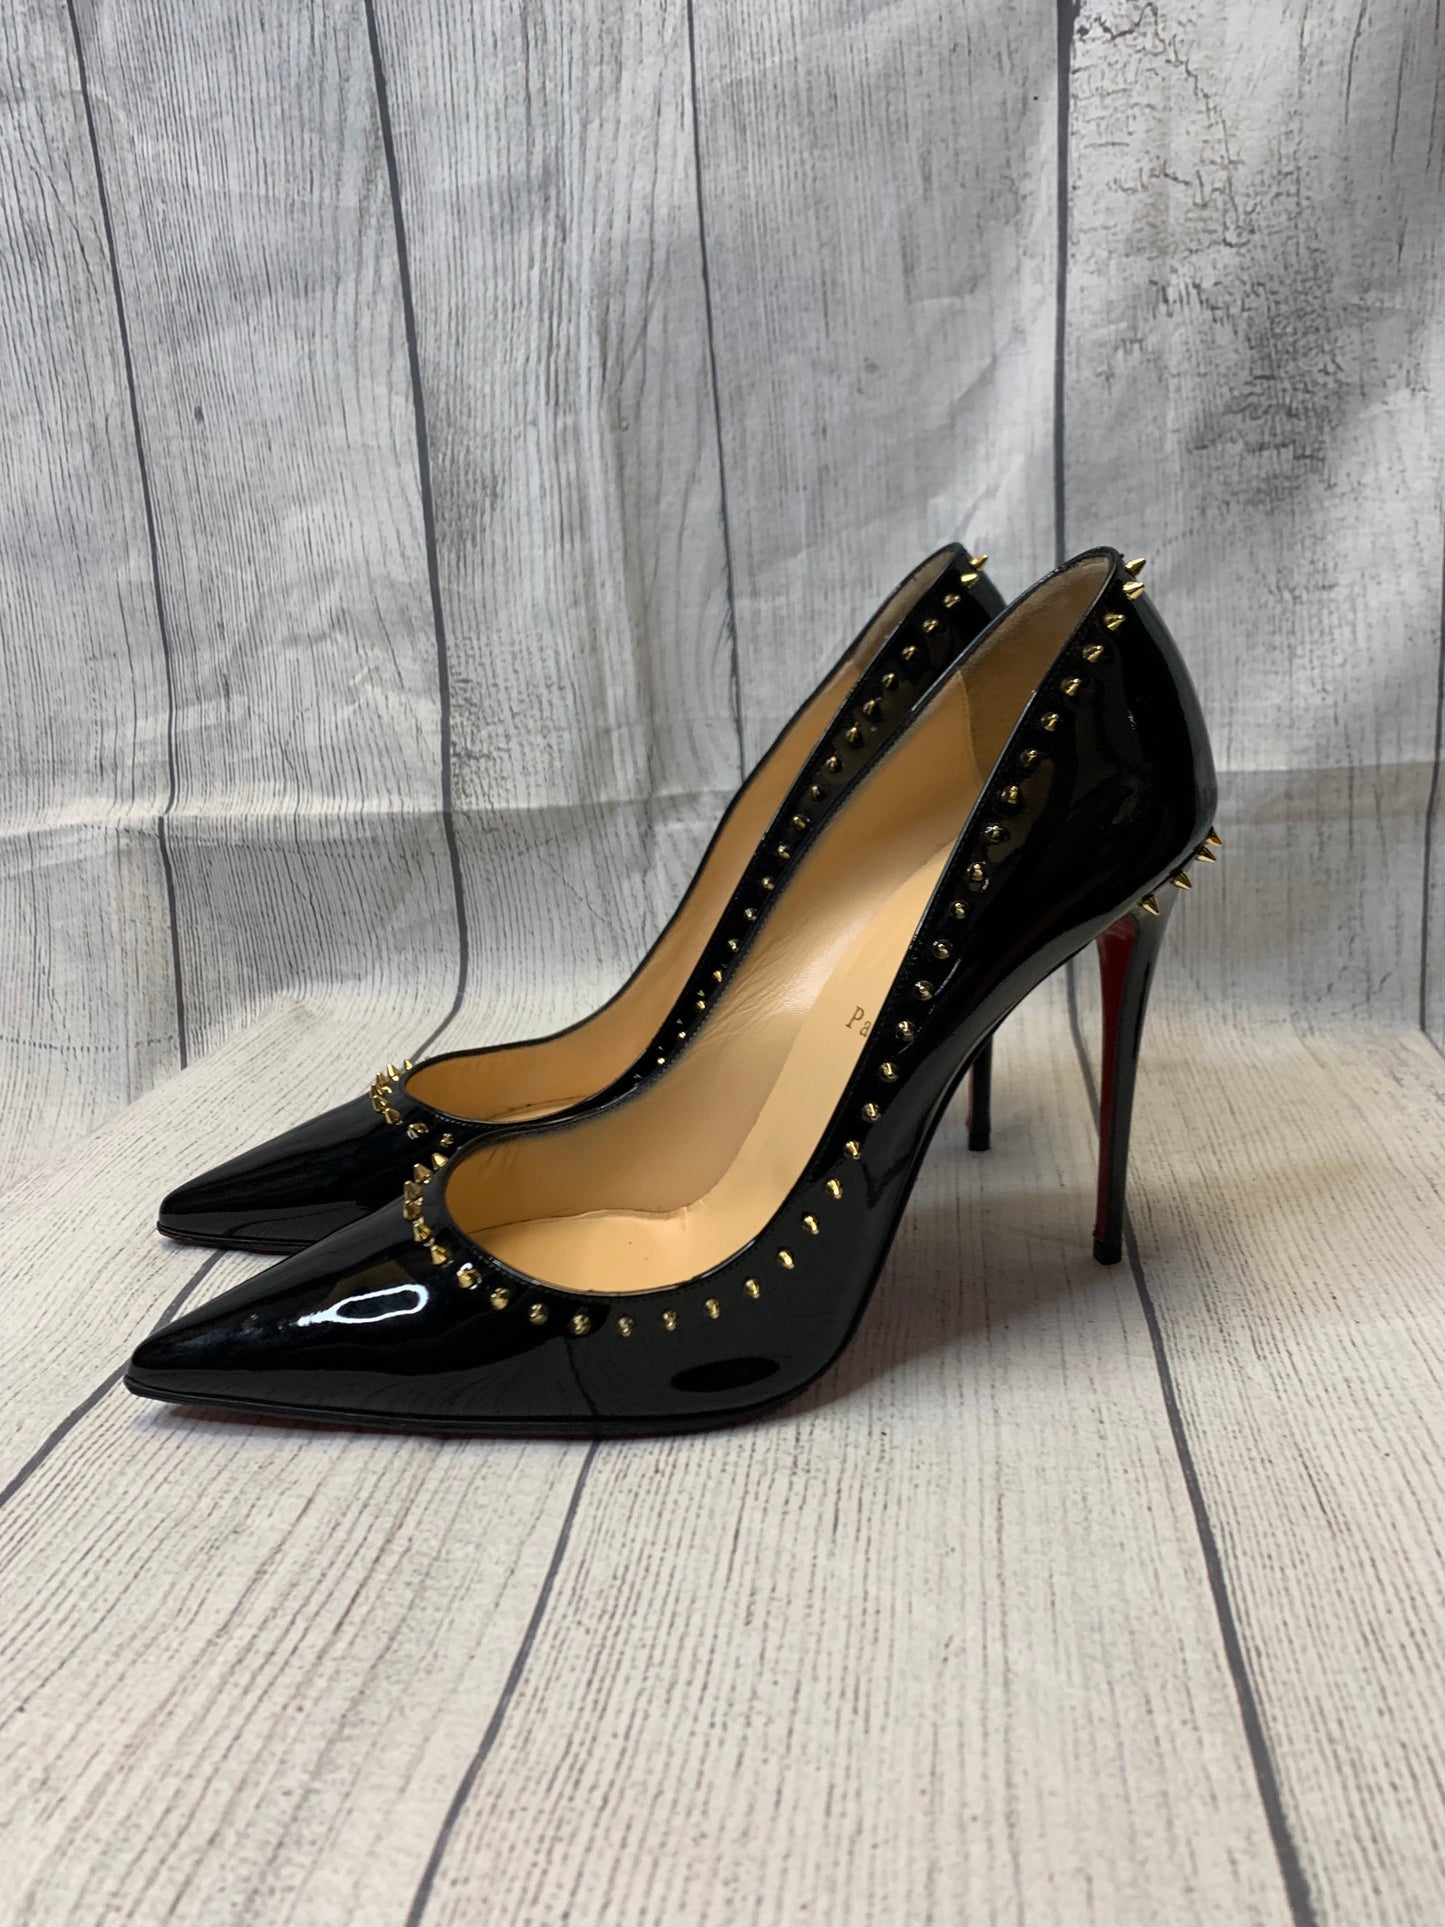 Shoes Heels Stiletto By Christian Louboutin  Size: 9.5